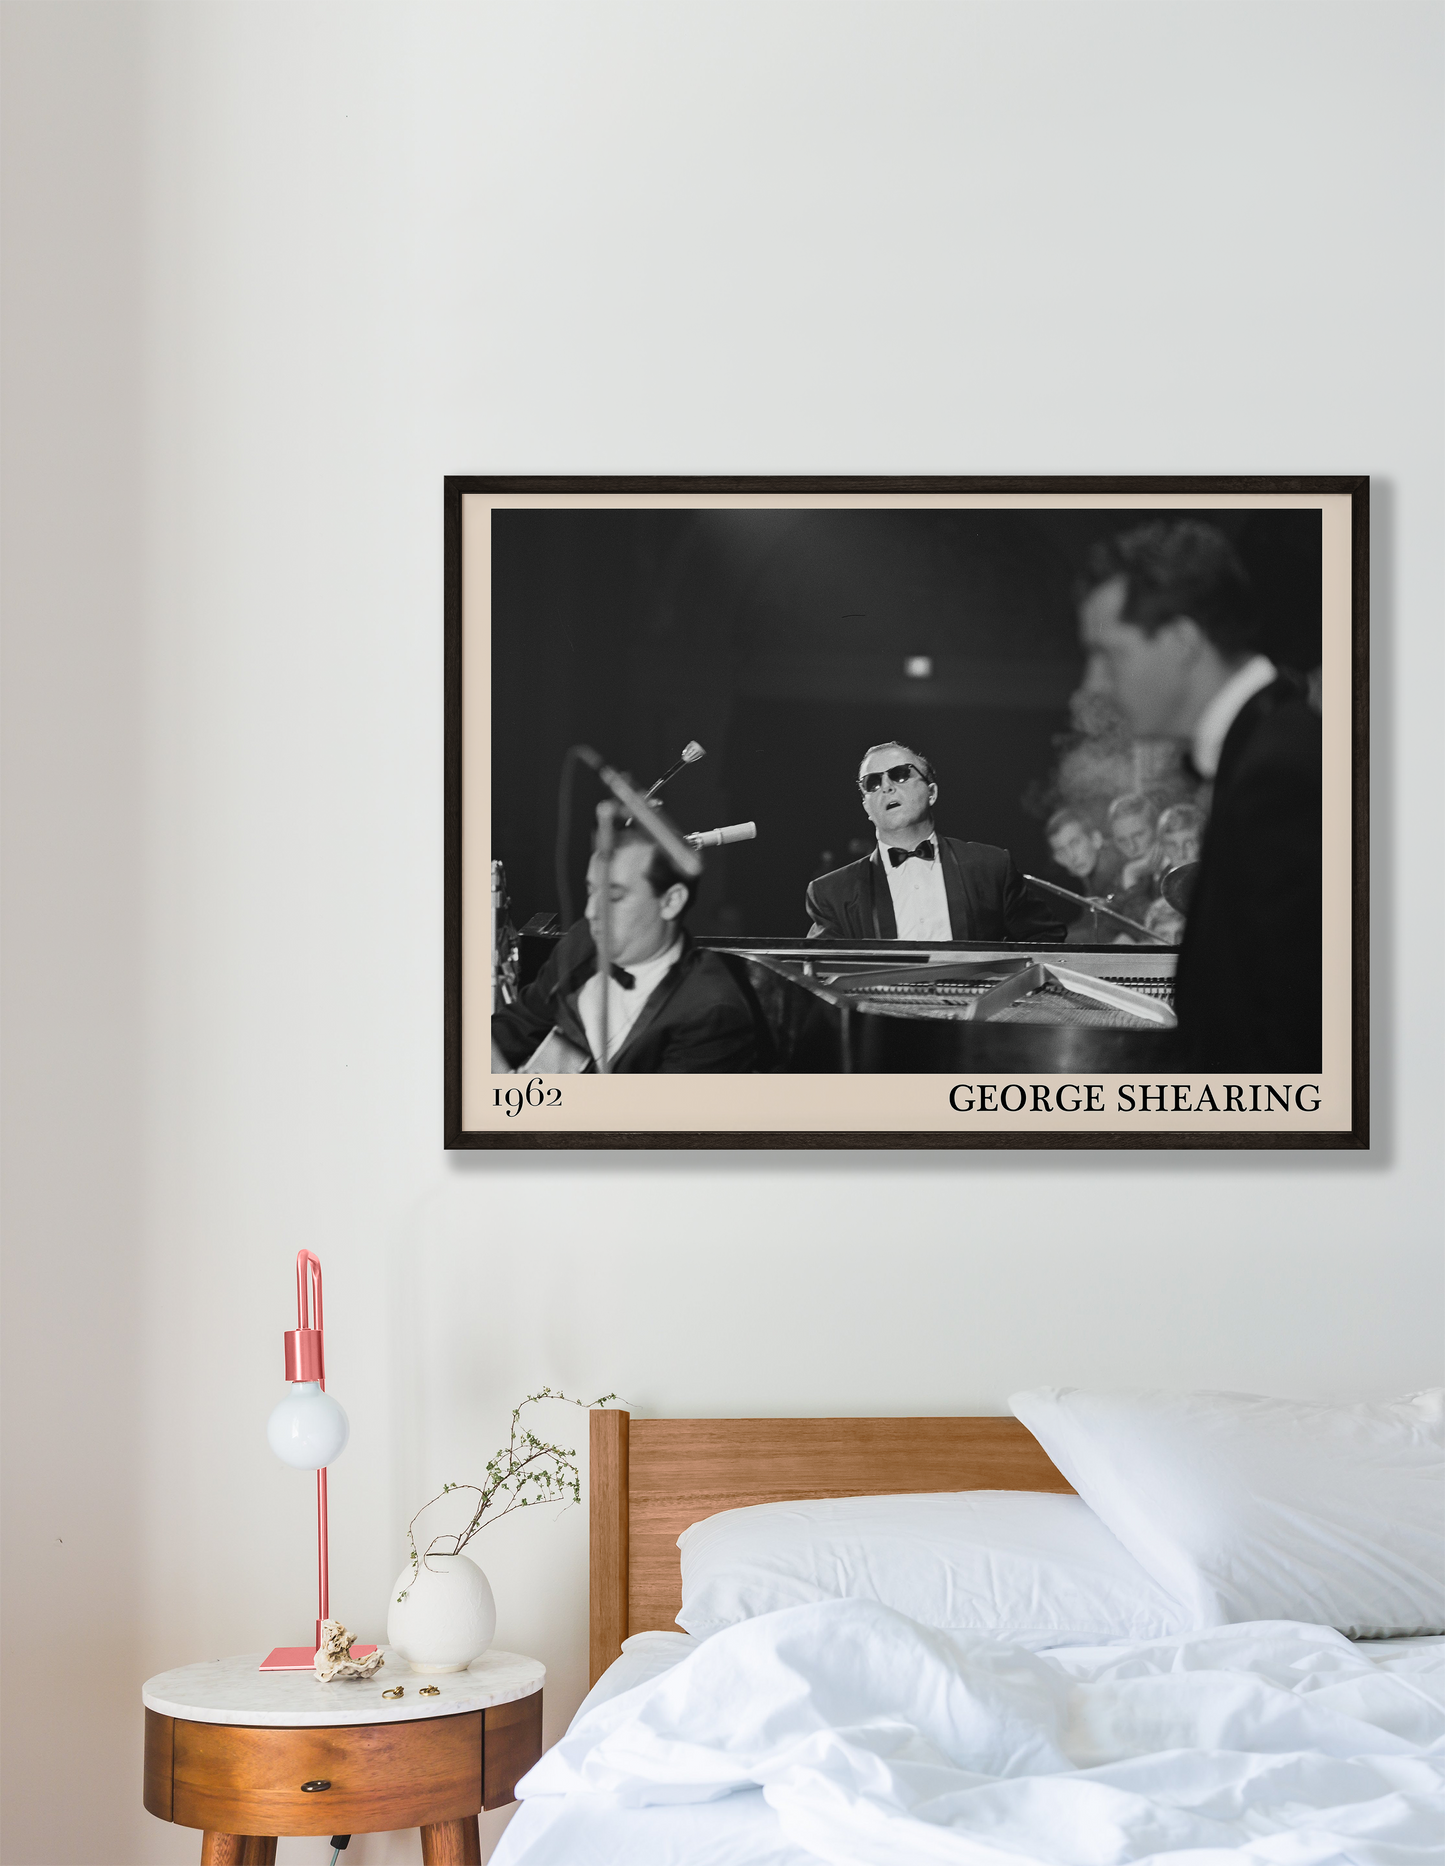 1962 picture of George Shearing playing piano. Picture crafted into a cool black framed jazz print, with an off-white border. Poster is hanging on a grey bedroom wall